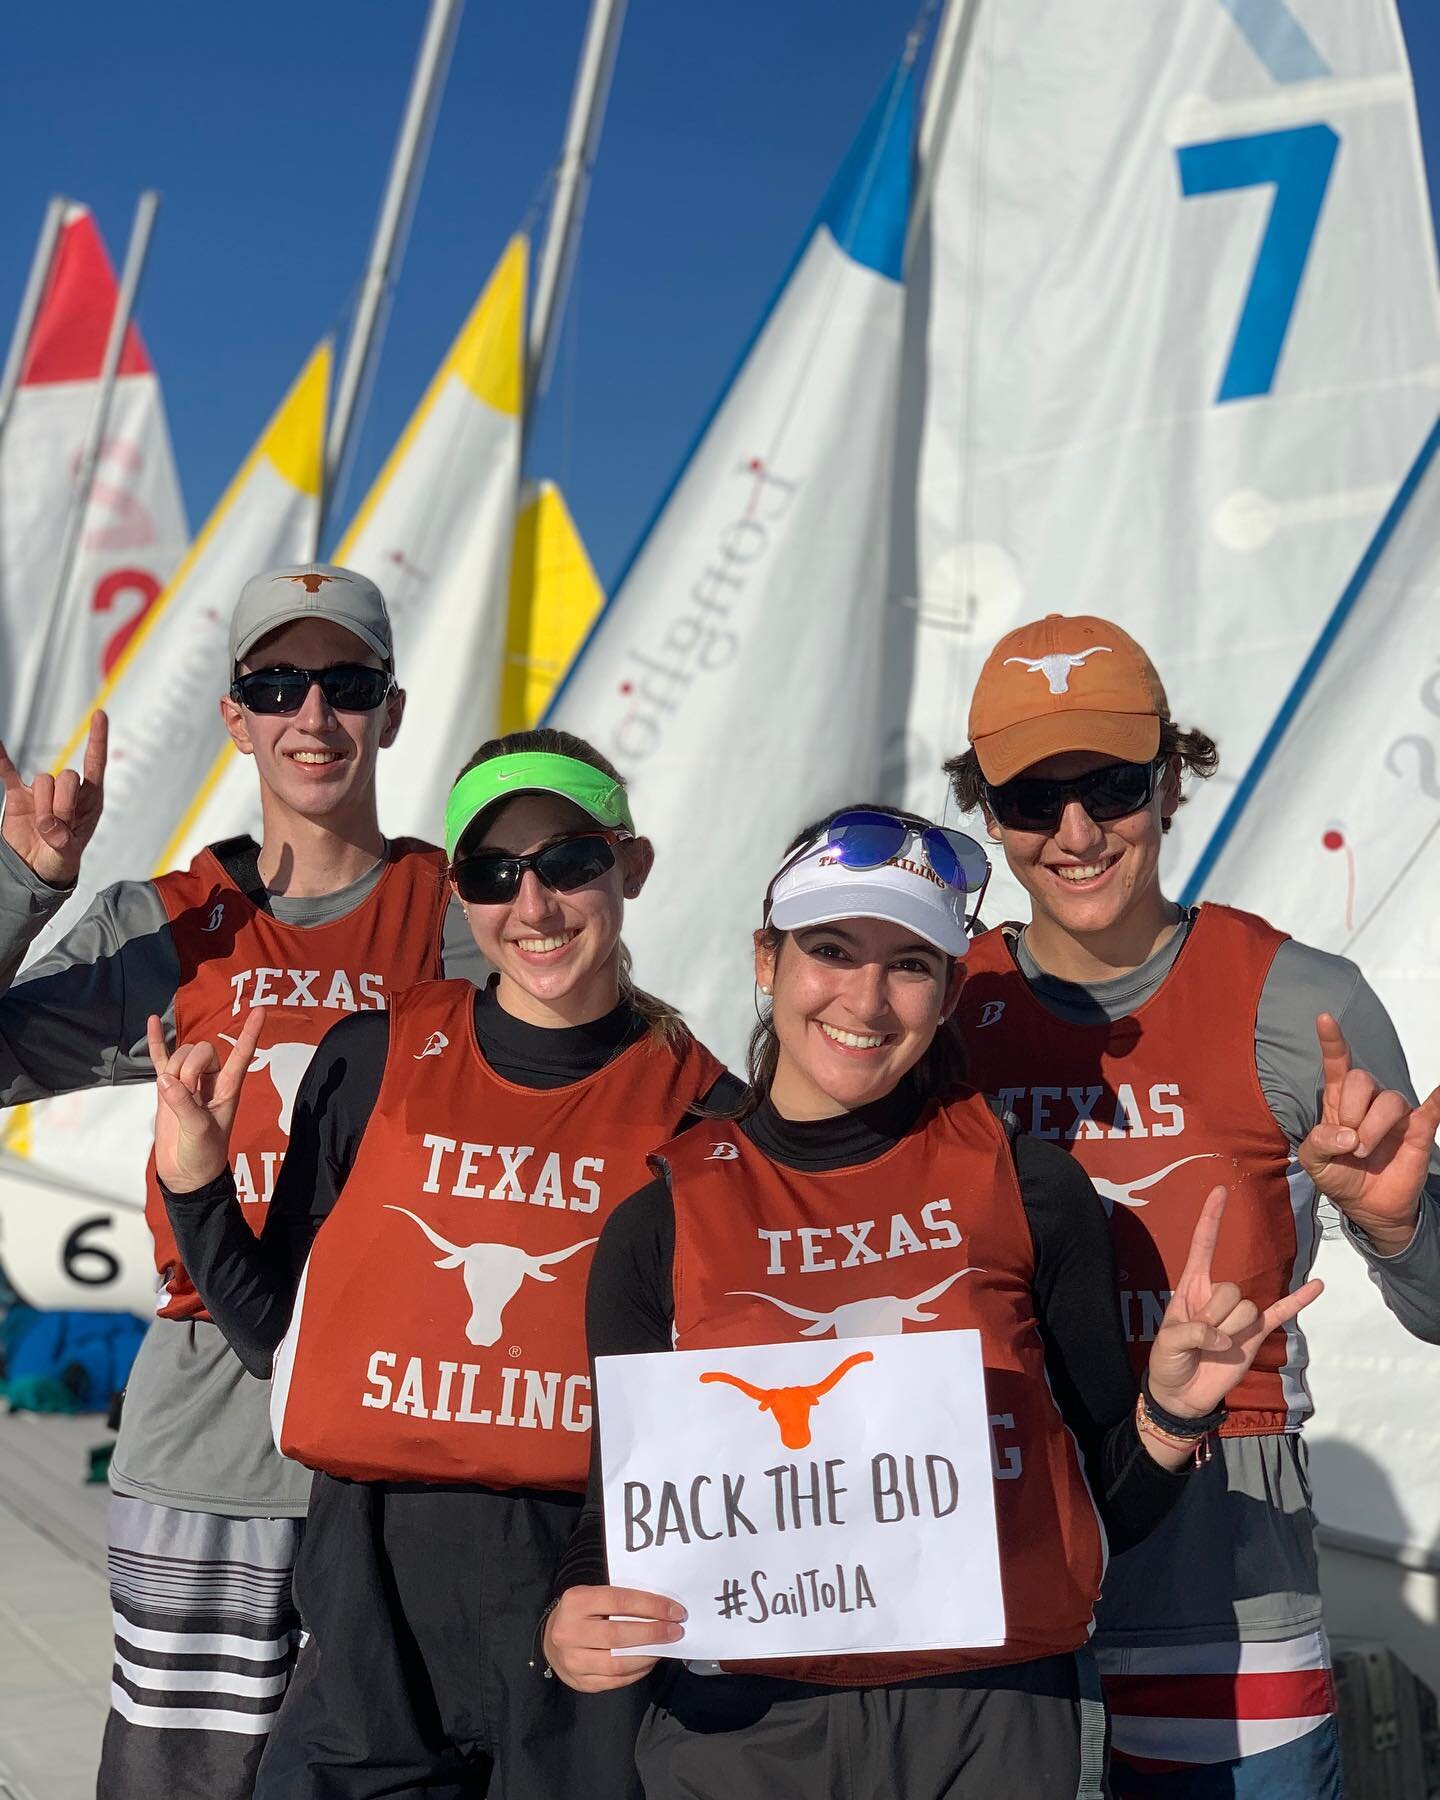 Texas Sailing joins @worldsailingofficial in BACKING THE BID to get sailing reinstated at the Los Angeles Paralympic Games in 2028⛵️🌎

@ussailing @ussailingteam @paraworldsailingofficial 
#BacktheBid #SailtoLA